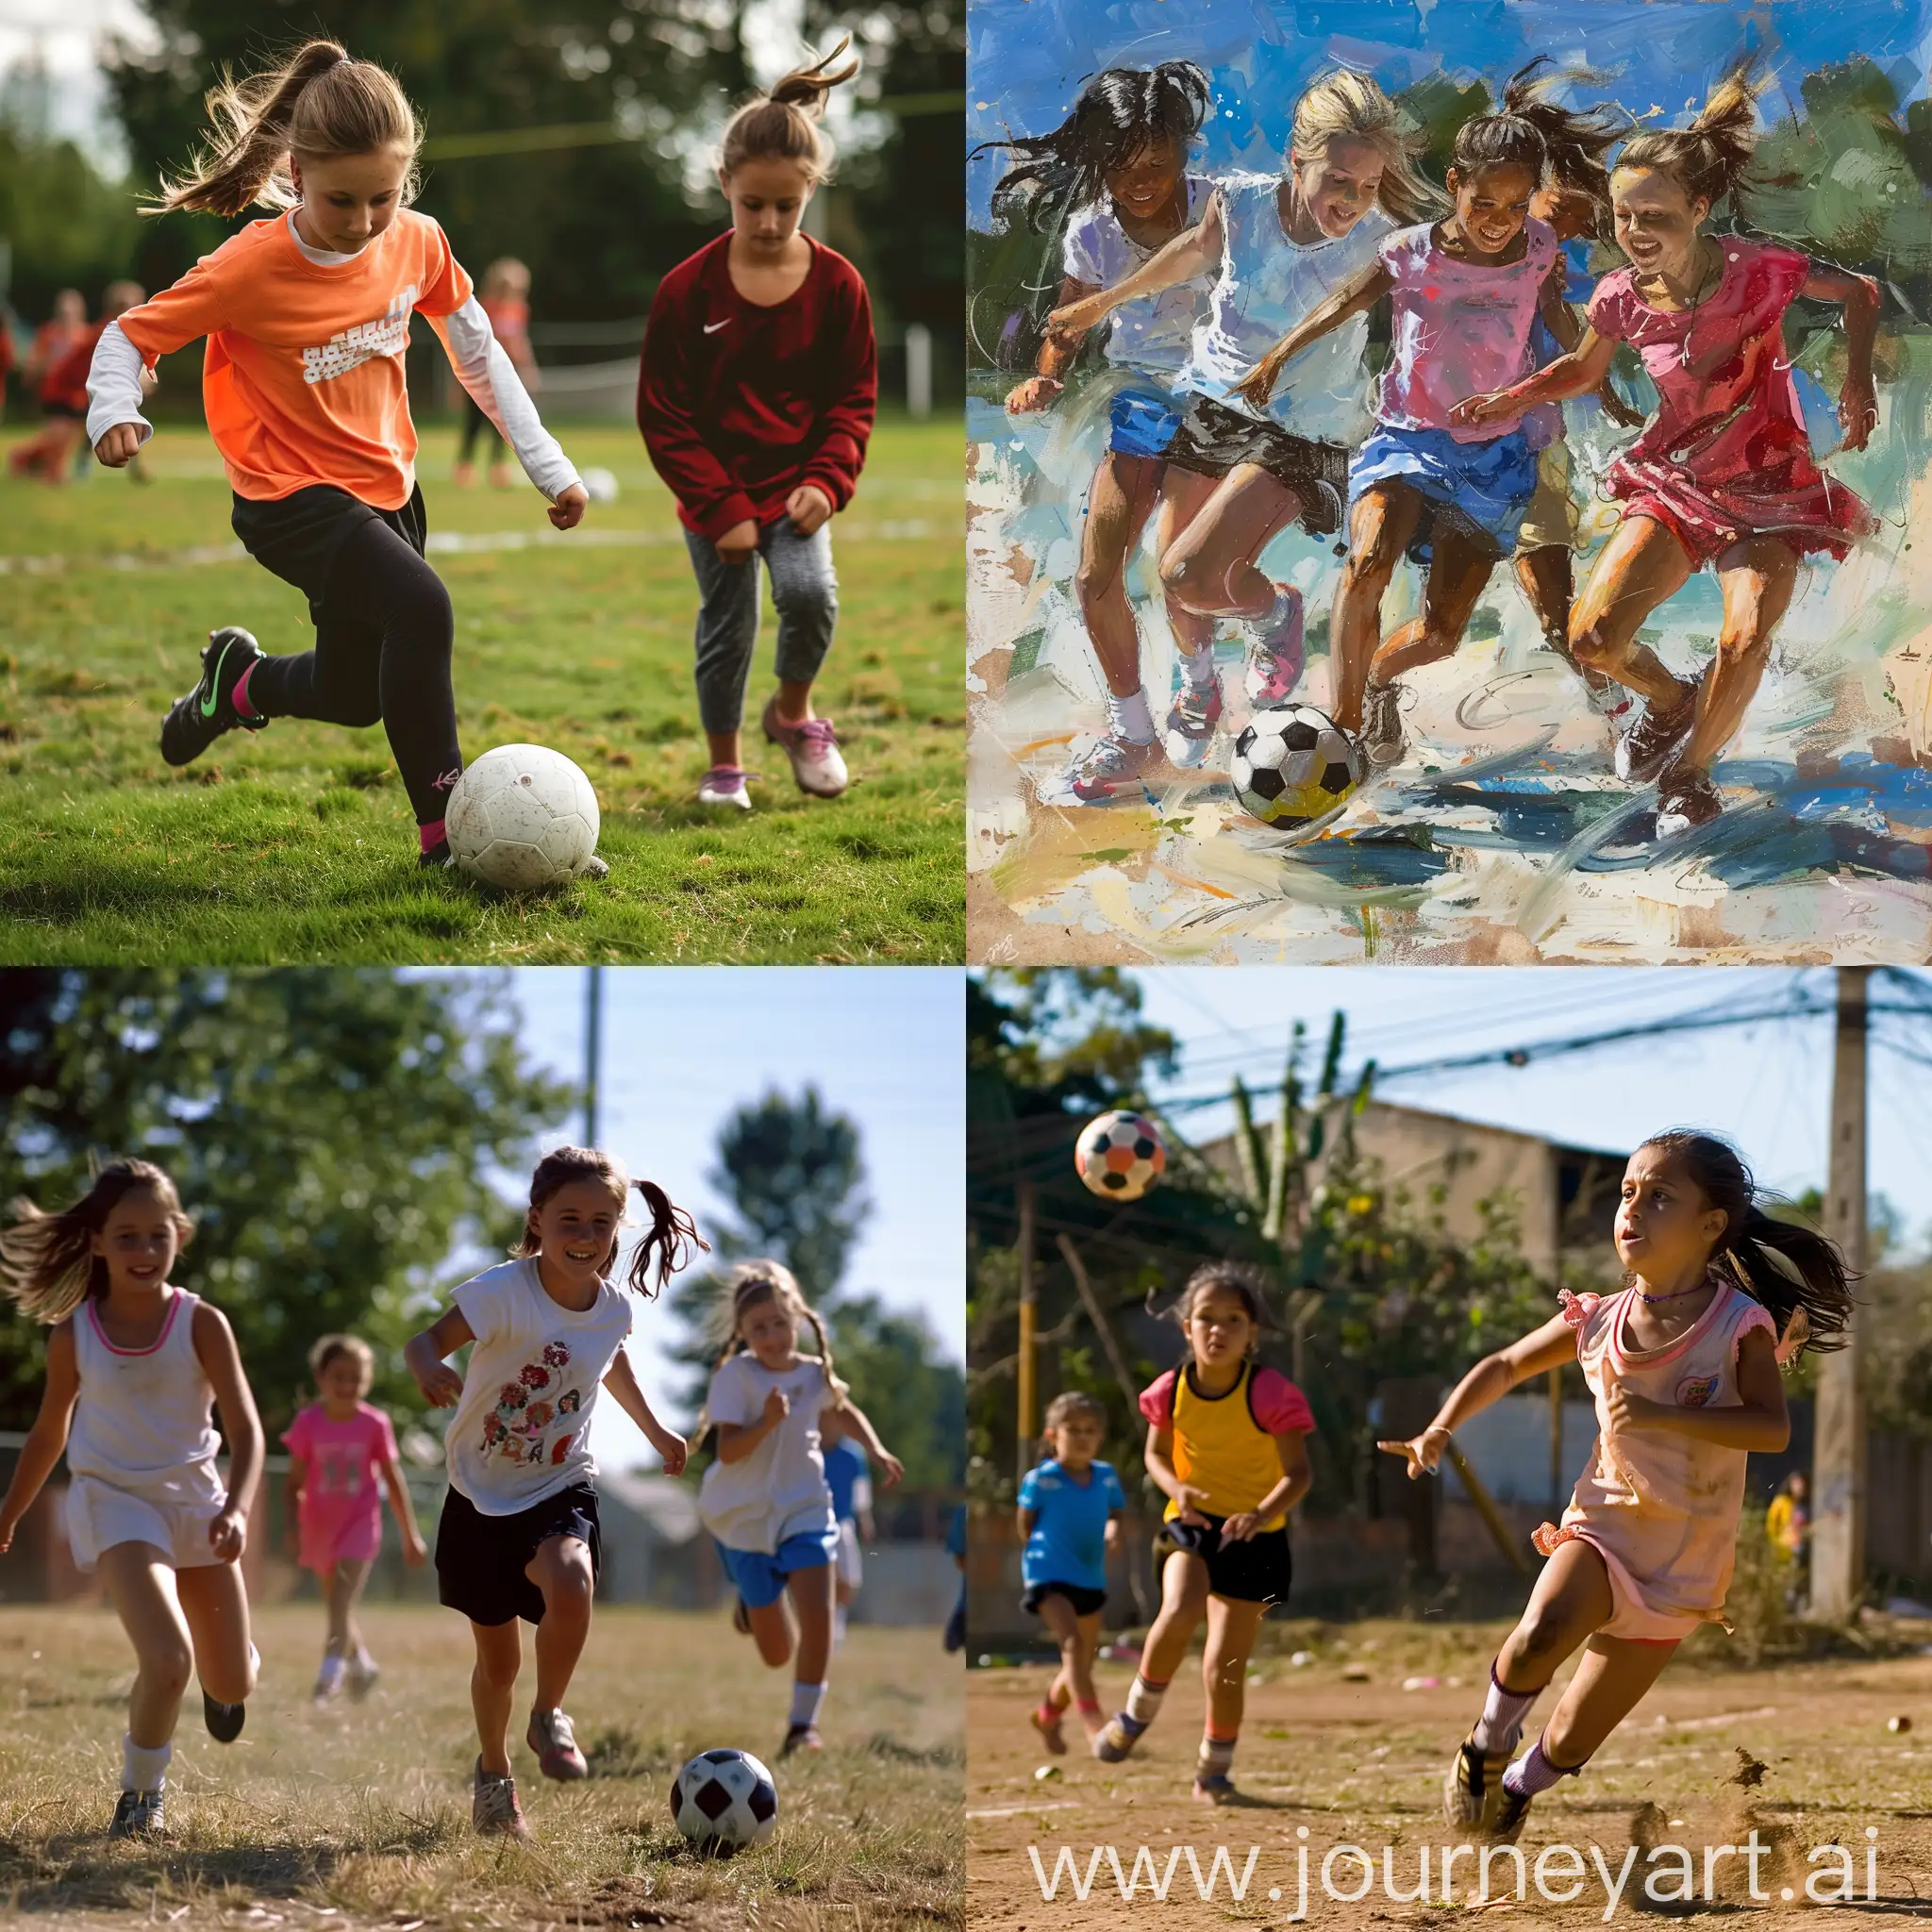 Joyful-Girls-Playing-Football-Together-in-a-Sunny-Park